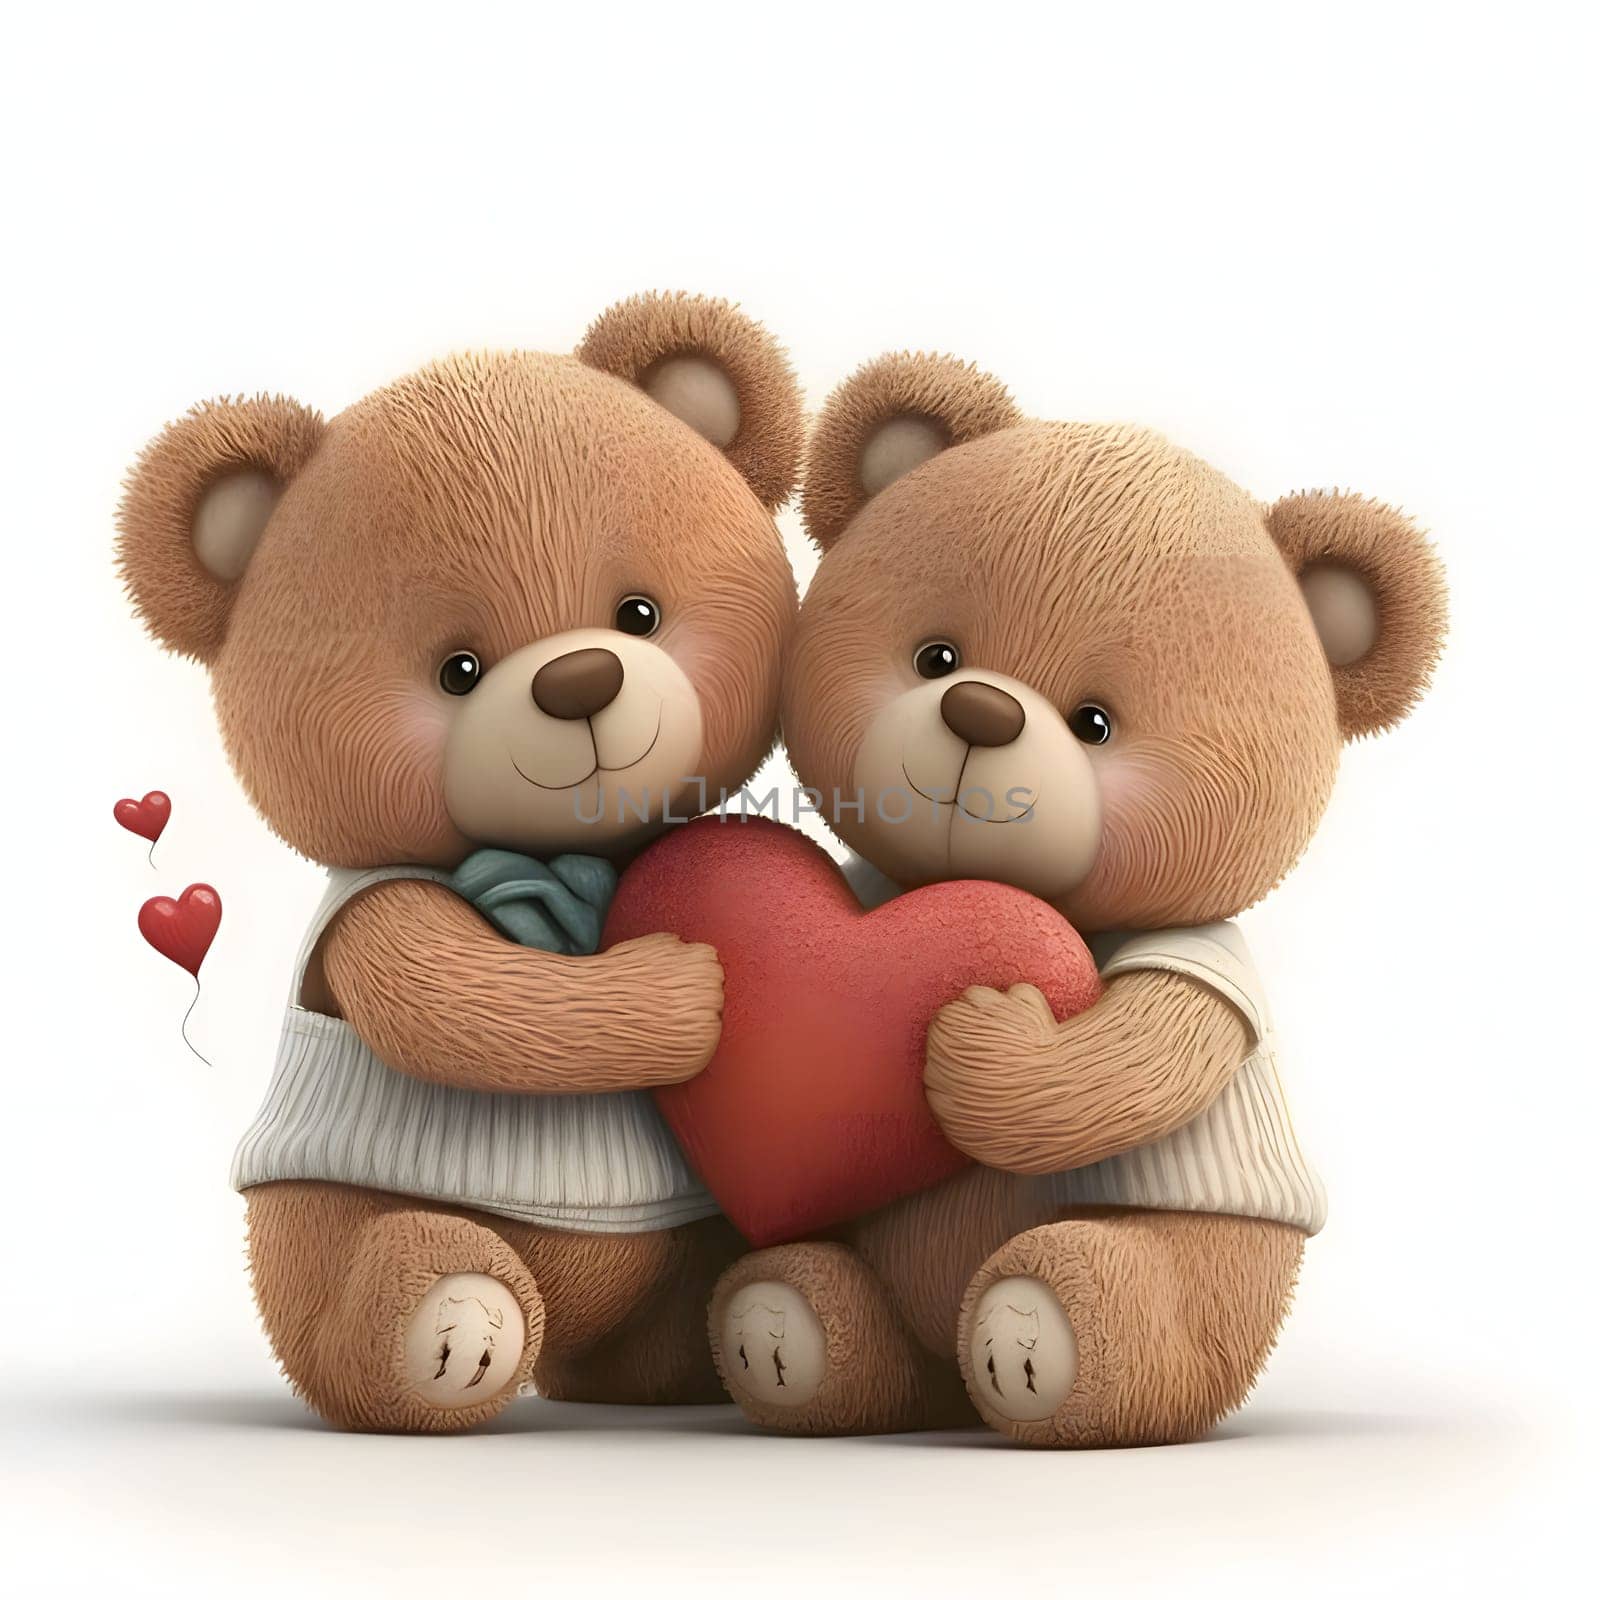 Two Plush Teddy Bears Holding a Heart, isolated white background. Heart as a symbol of affection and love. The time of falling in love and love.